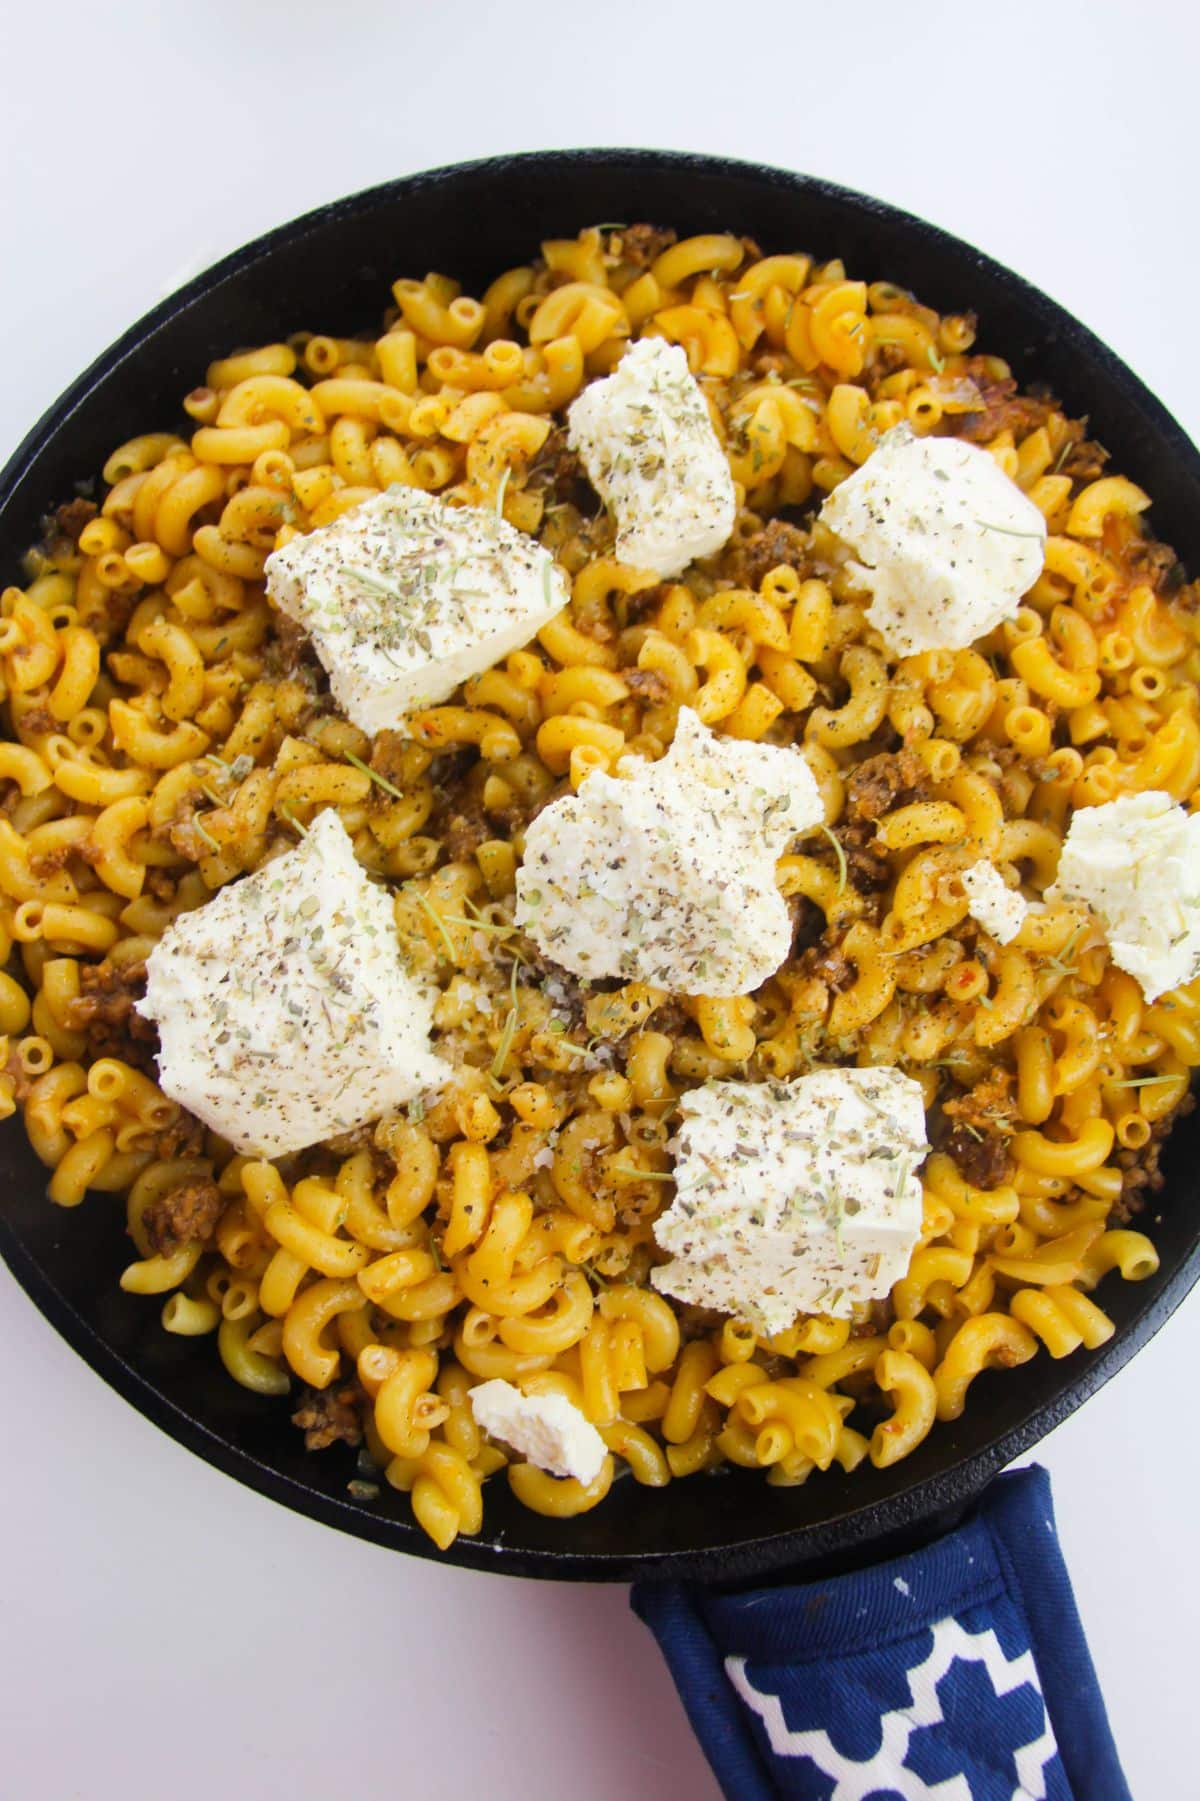 Cream cheese, milk, Italian seasoning, salt and pepper are added to the pasta in a large skillet.